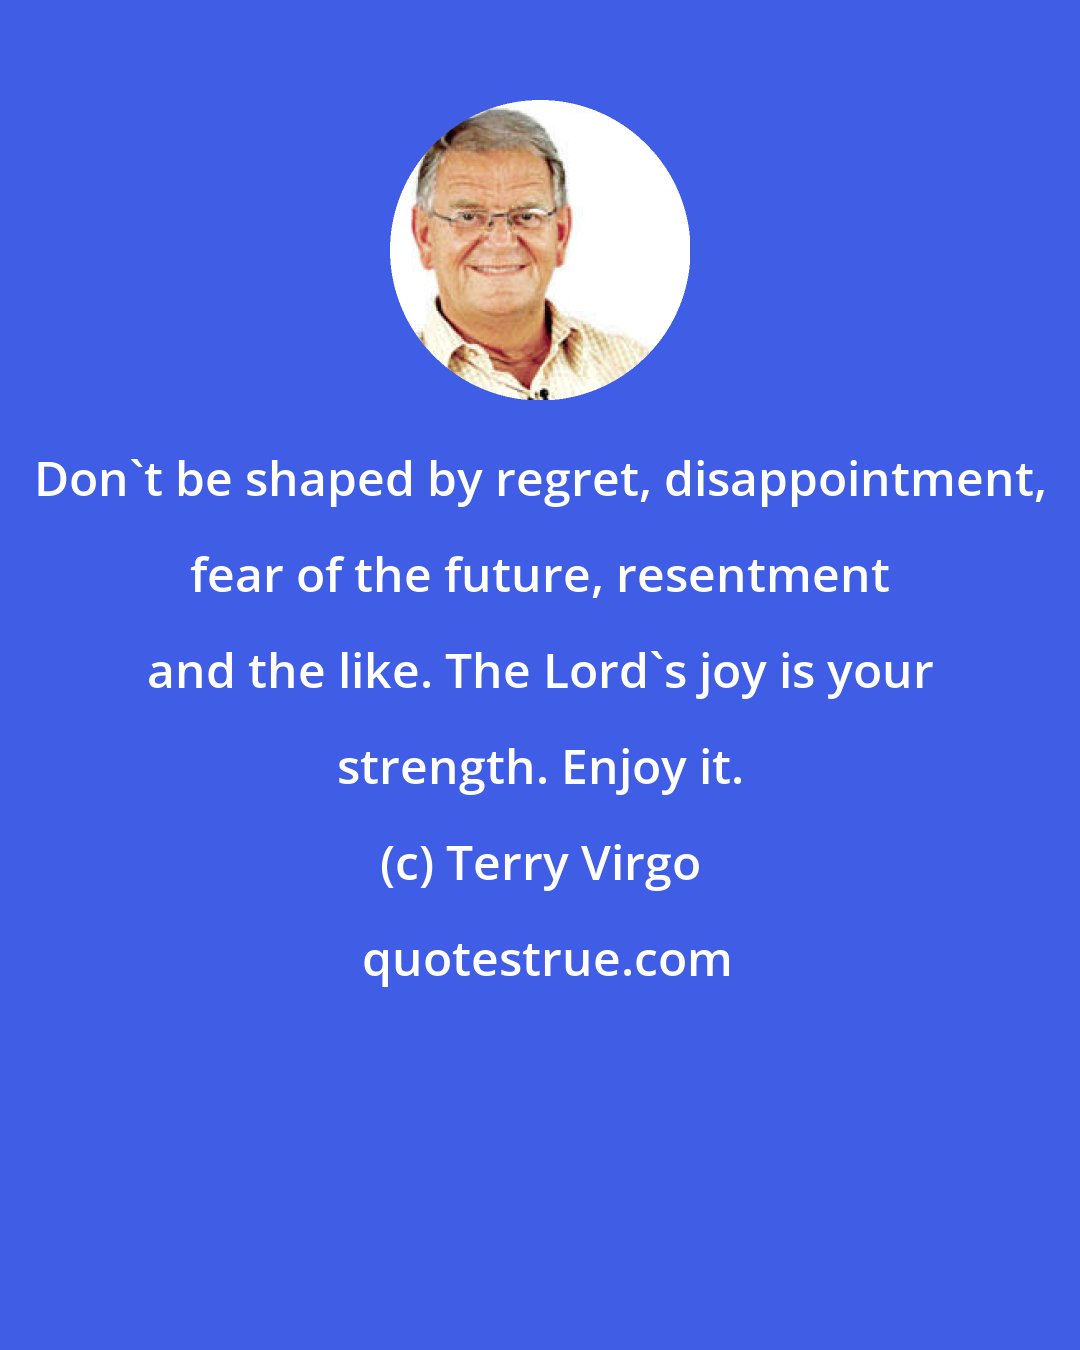 Terry Virgo: Don't be shaped by regret, disappointment, fear of the future, resentment and the like. The Lord's joy is your strength. Enjoy it.